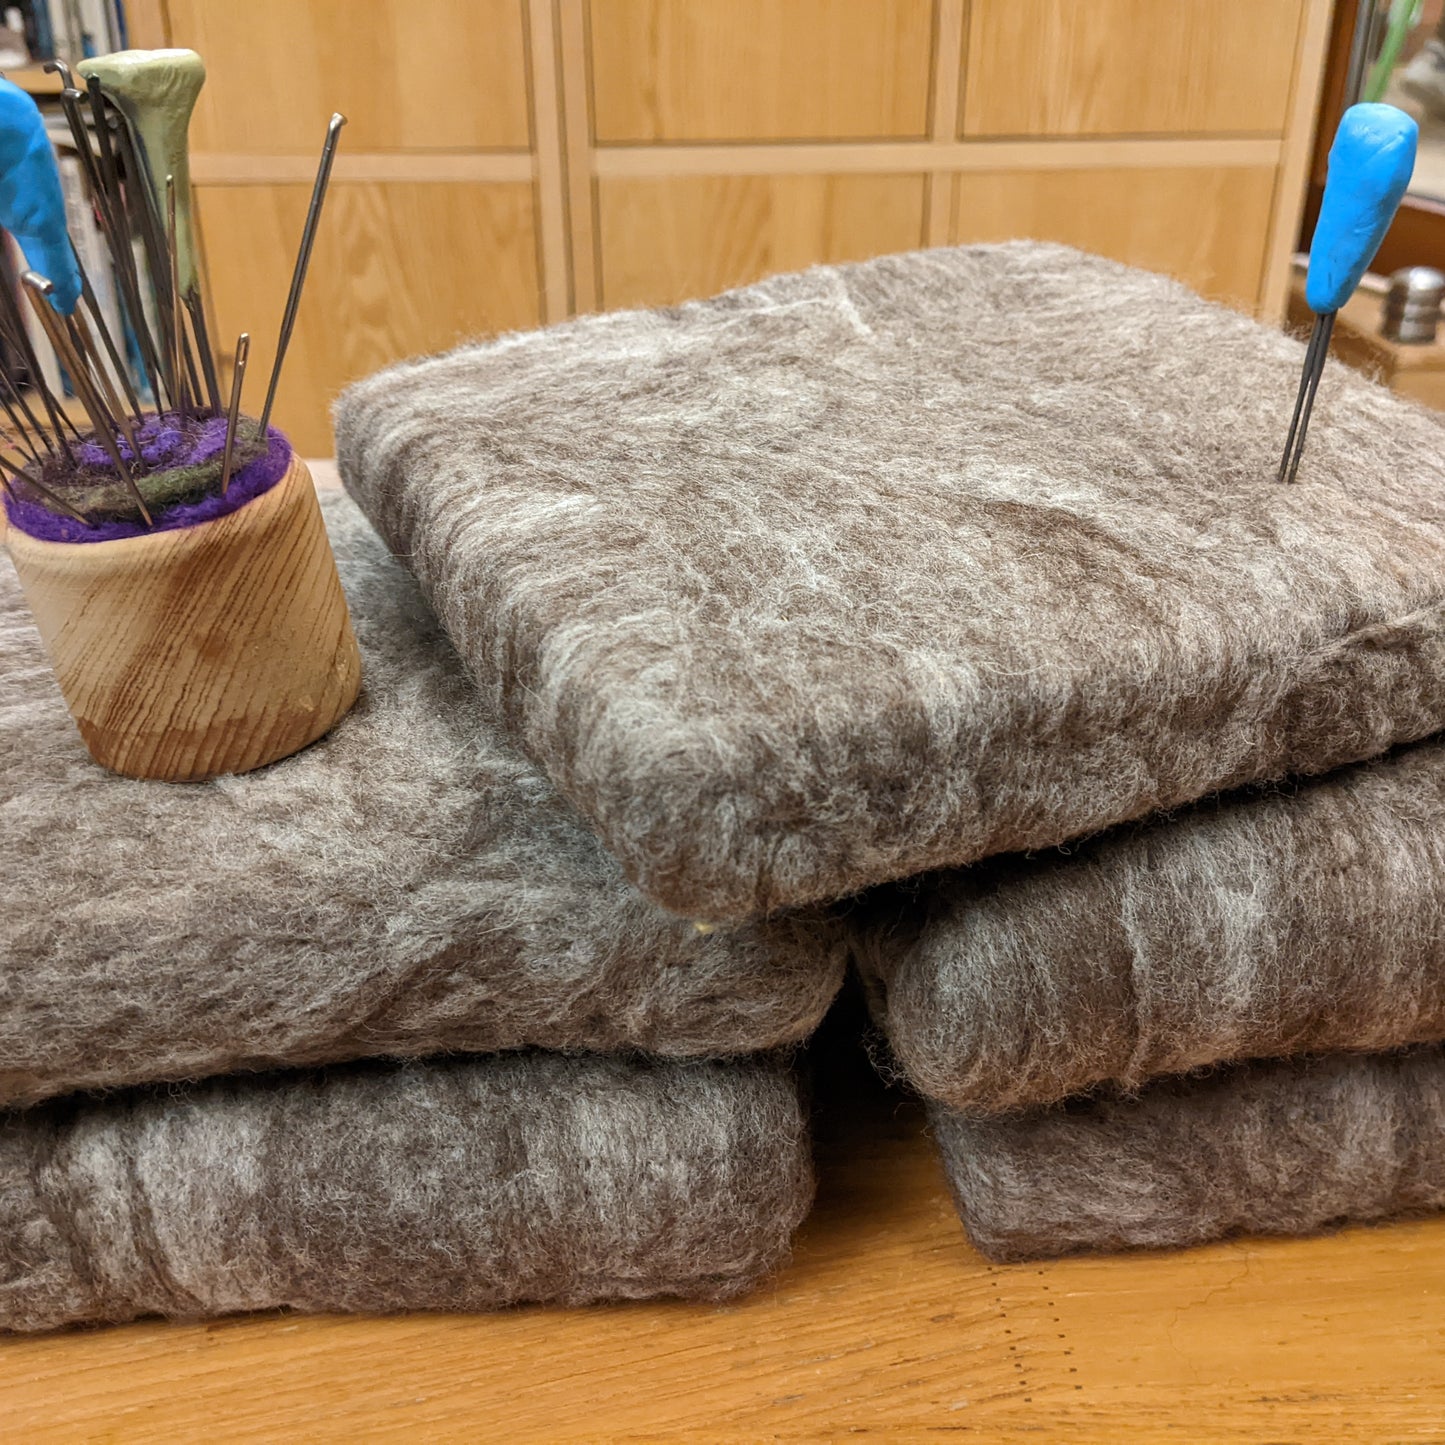 Basic materials and insruction kit - create your own felting mat